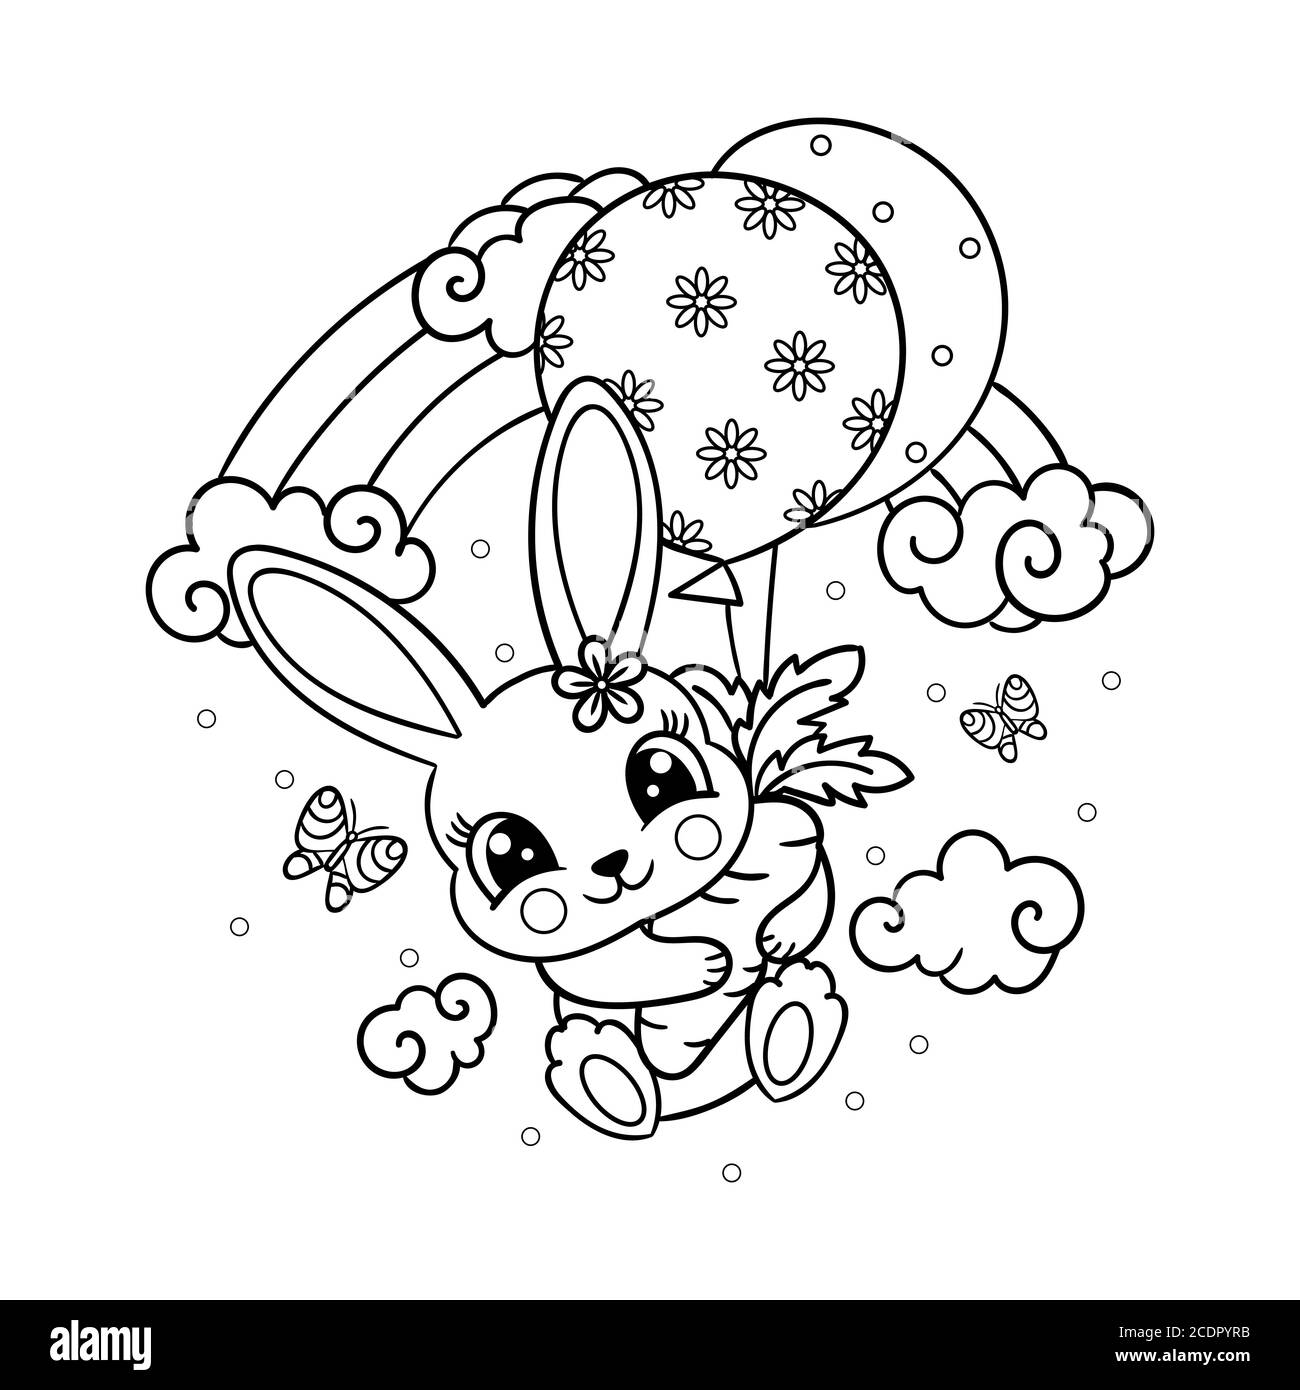 Cute little rabbit is flying in a balloon with a carrot. Black and white children's illustration. For the design of coloring books, greeting cards, pr Stock Vector